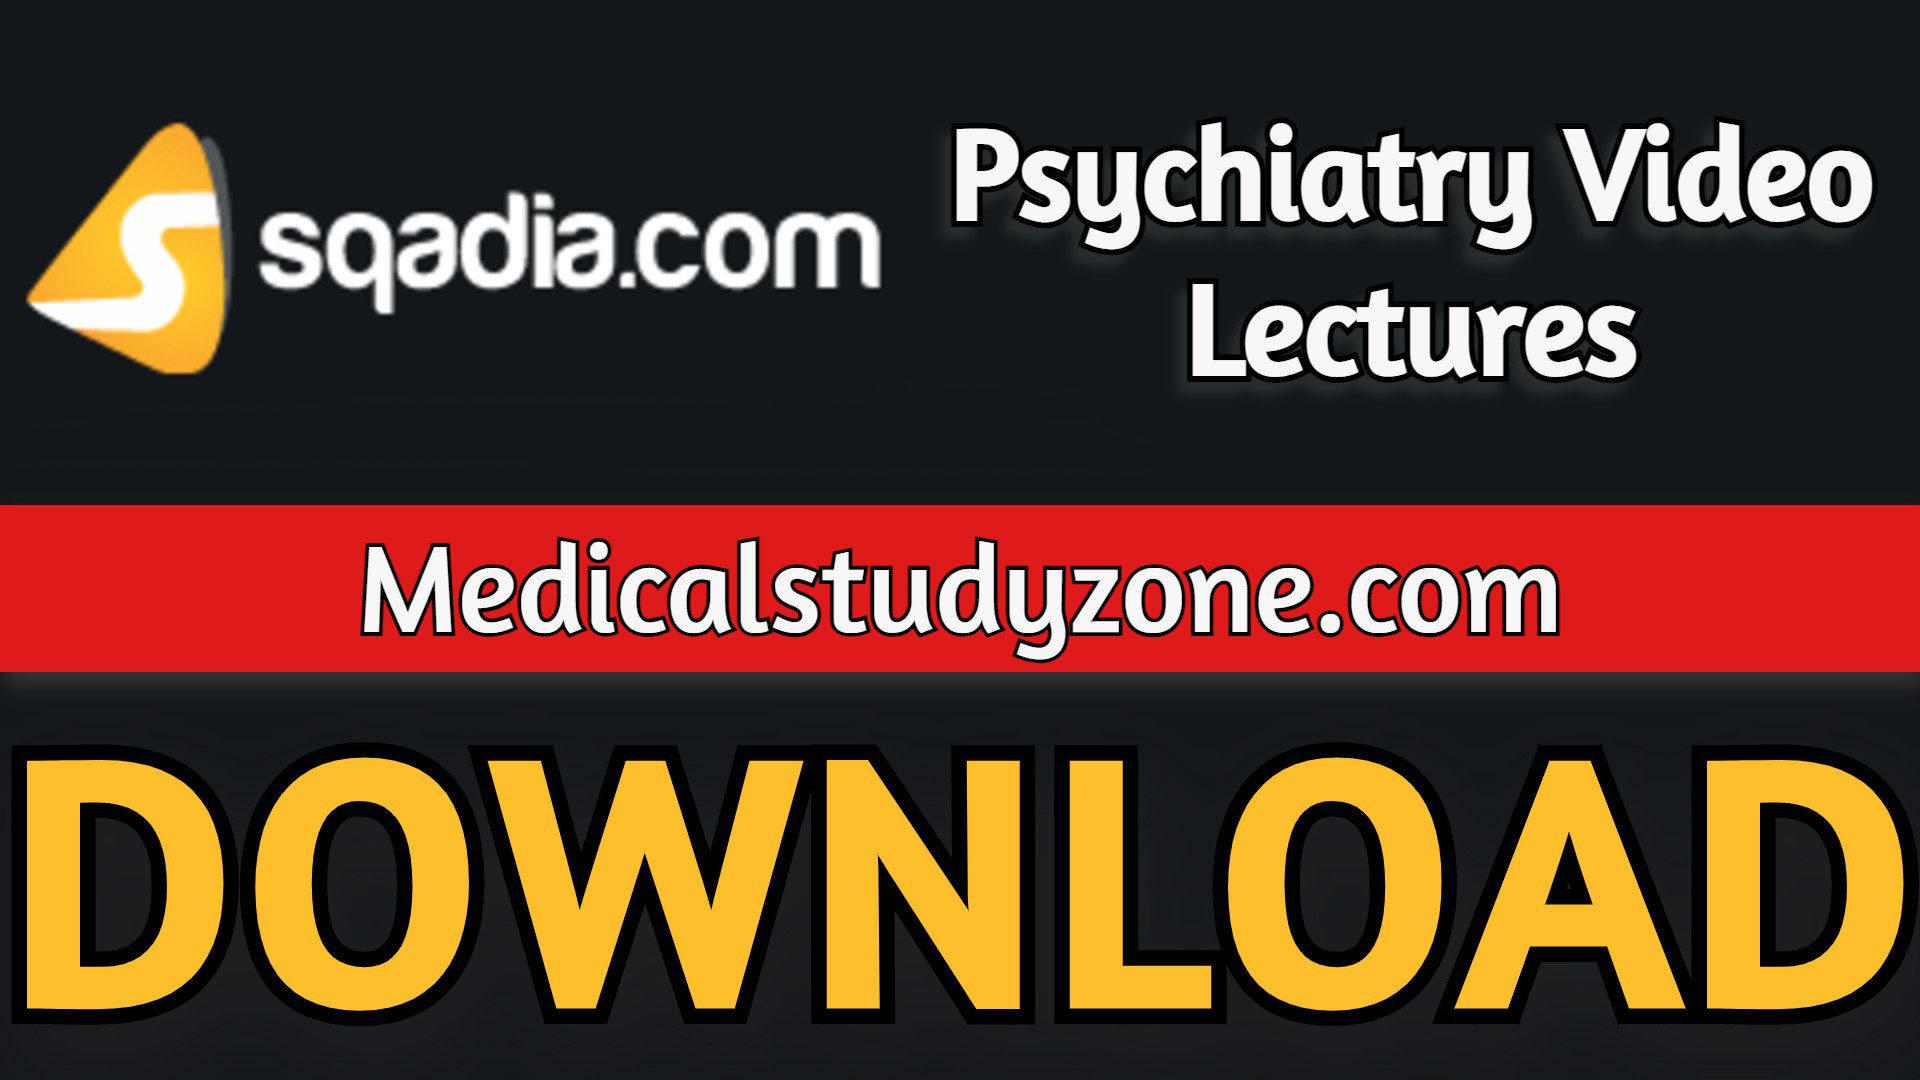 Sqadia Psychiatry Video Lectures 2021 Free Download